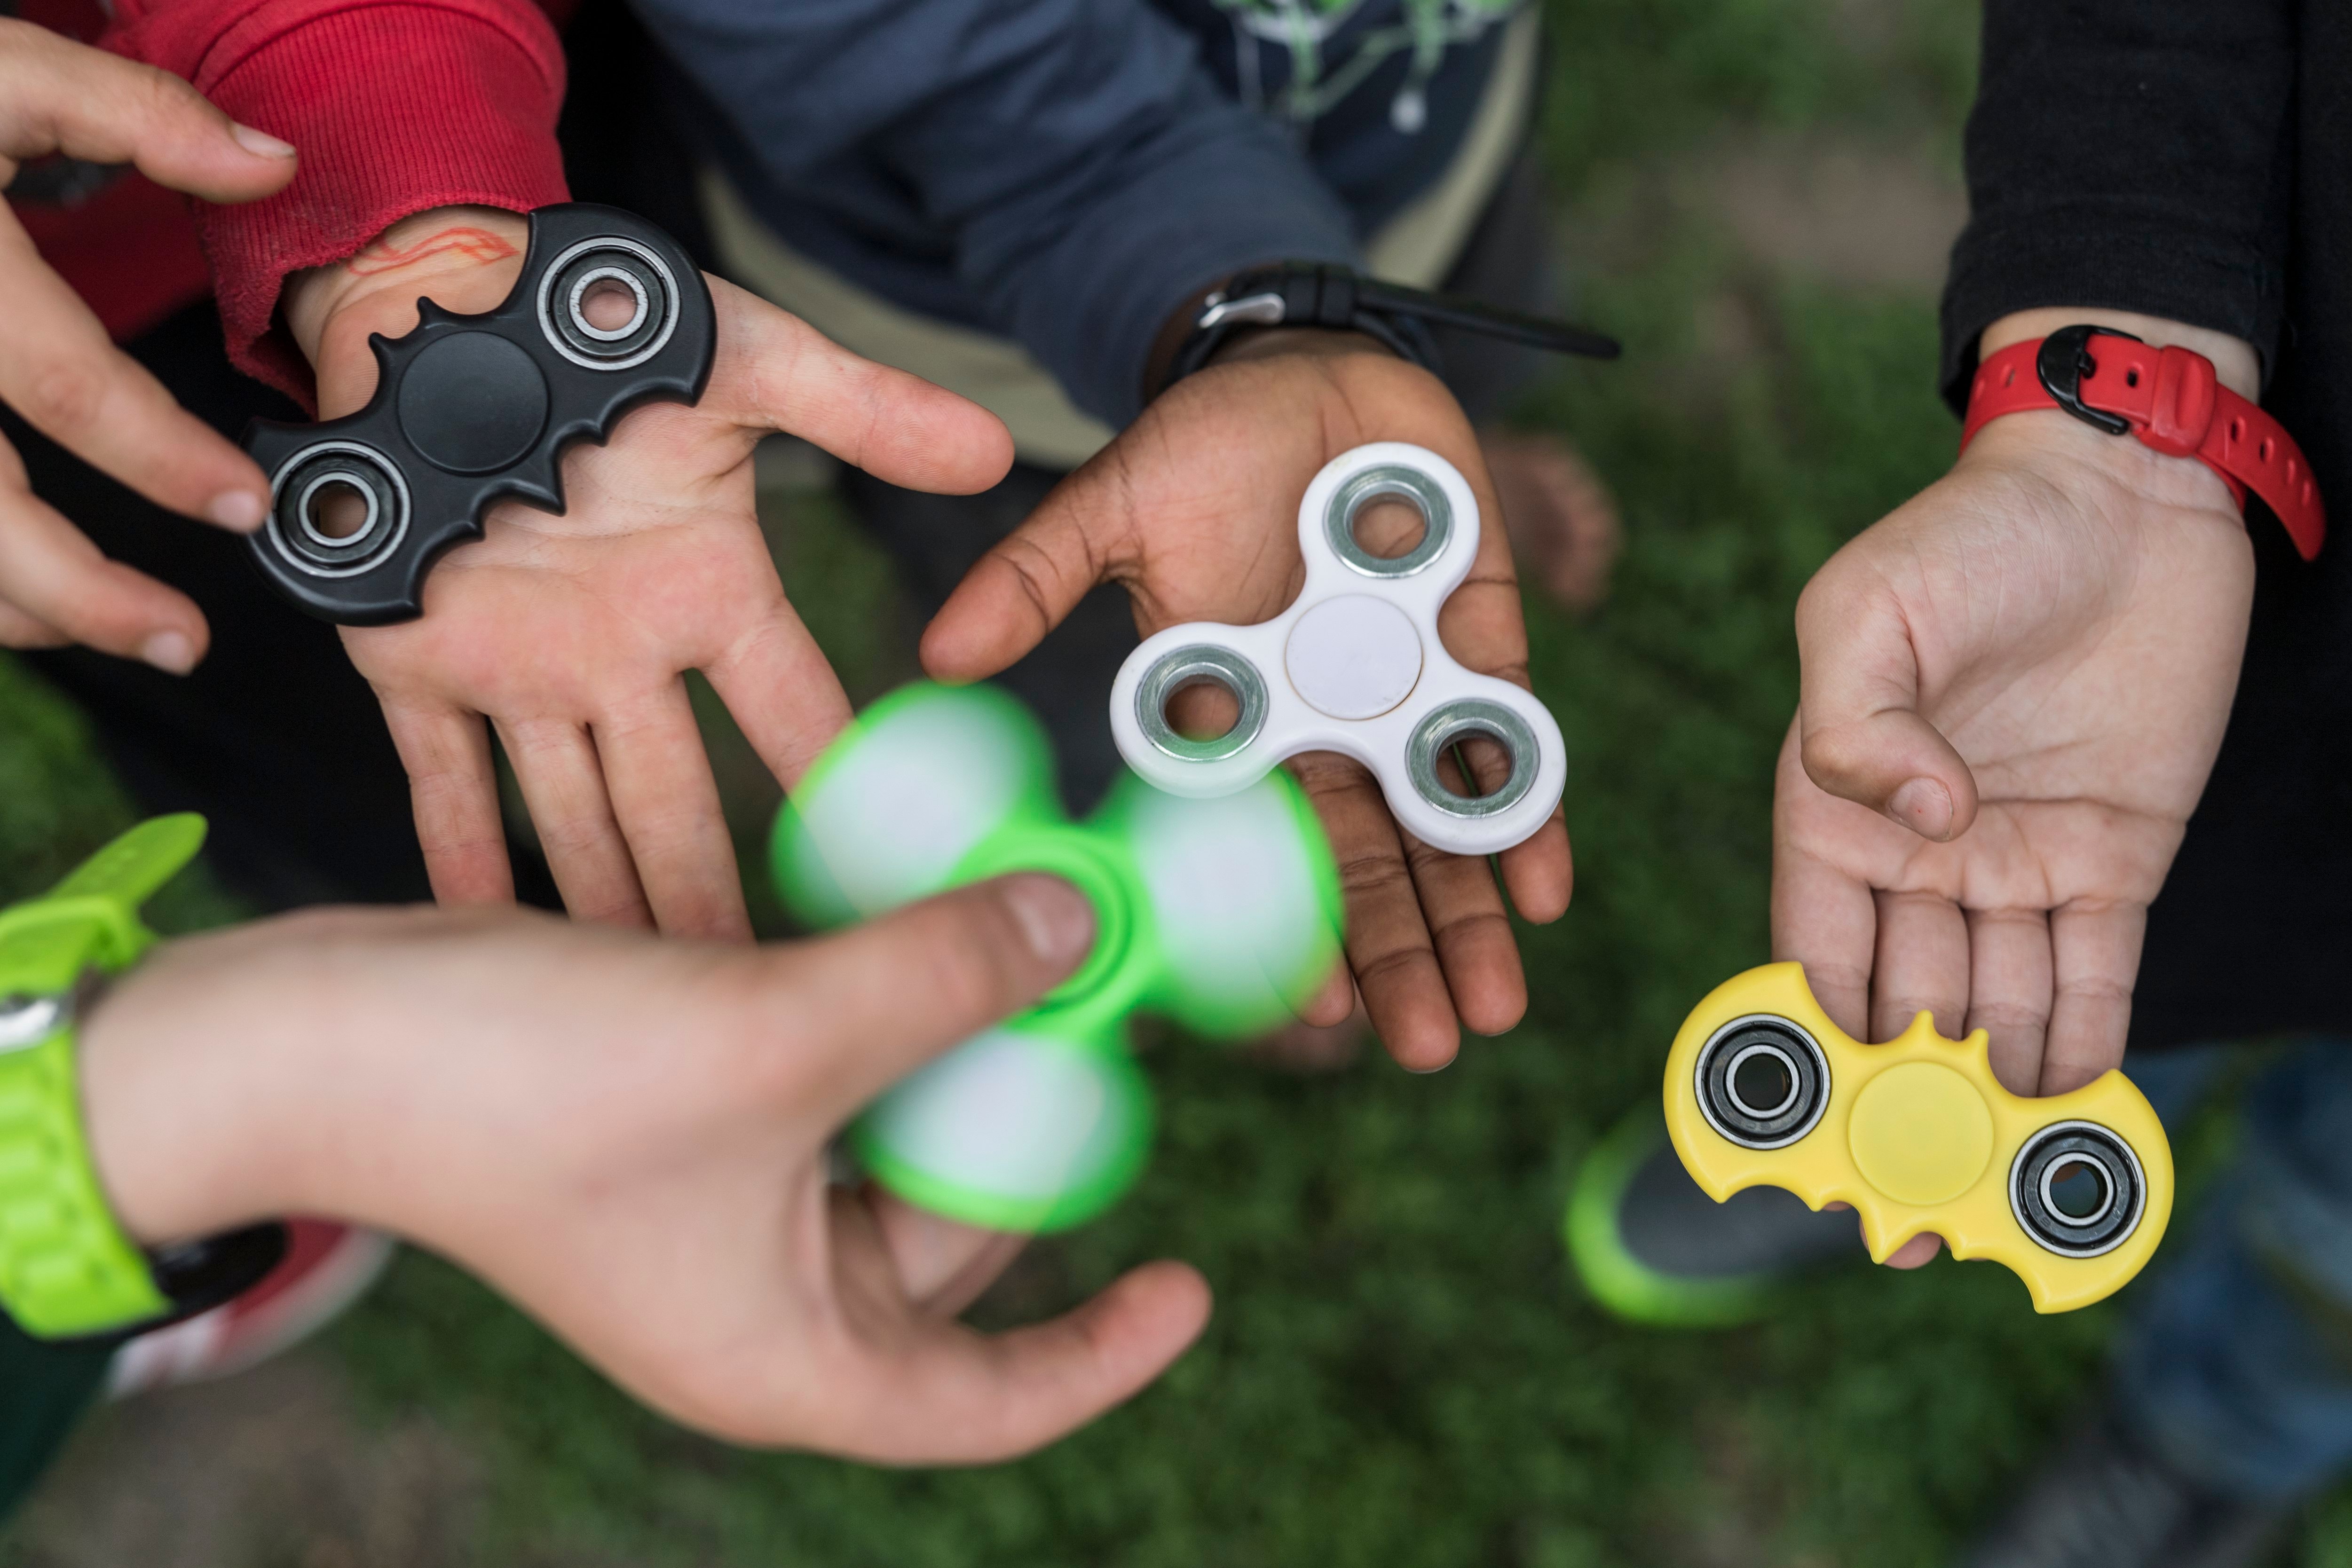 2017-05-18 20:51:01 epa05973566 A picture made available on 19 May 2017 shows children playing with the newest trend toy, a hand gadget called the Fidget Spinner (or Finger Spinner), at a school in Bern, 18 May 2017. The Fidget Spinner, a toy designed to help children with learning difficulties to relieve stress, is getting more popular around the world. EPA/ALESSANDRO DELLA VALLE